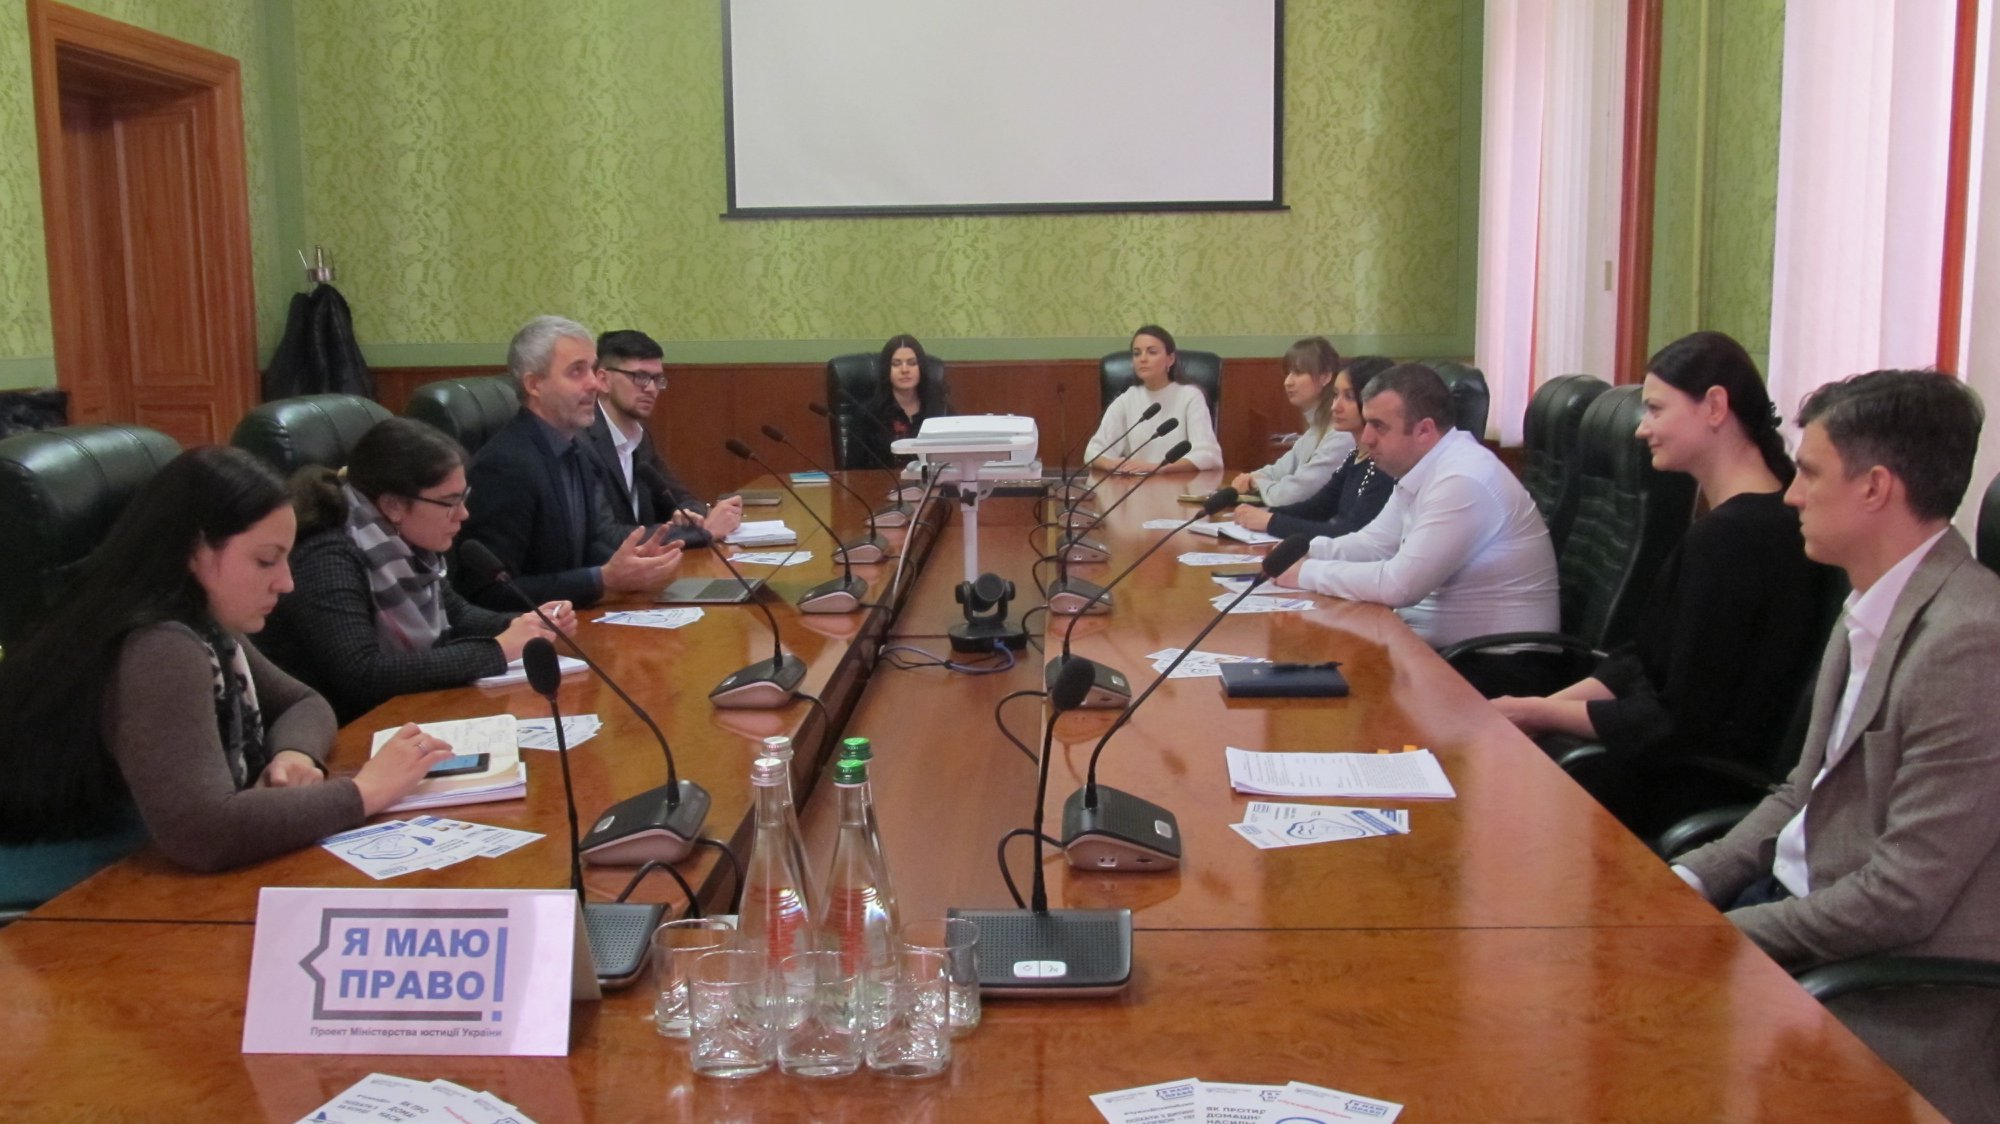 Bukovyna justice system representatives and the EU "Pravo-Justice" Project discussed the options of electronic file management